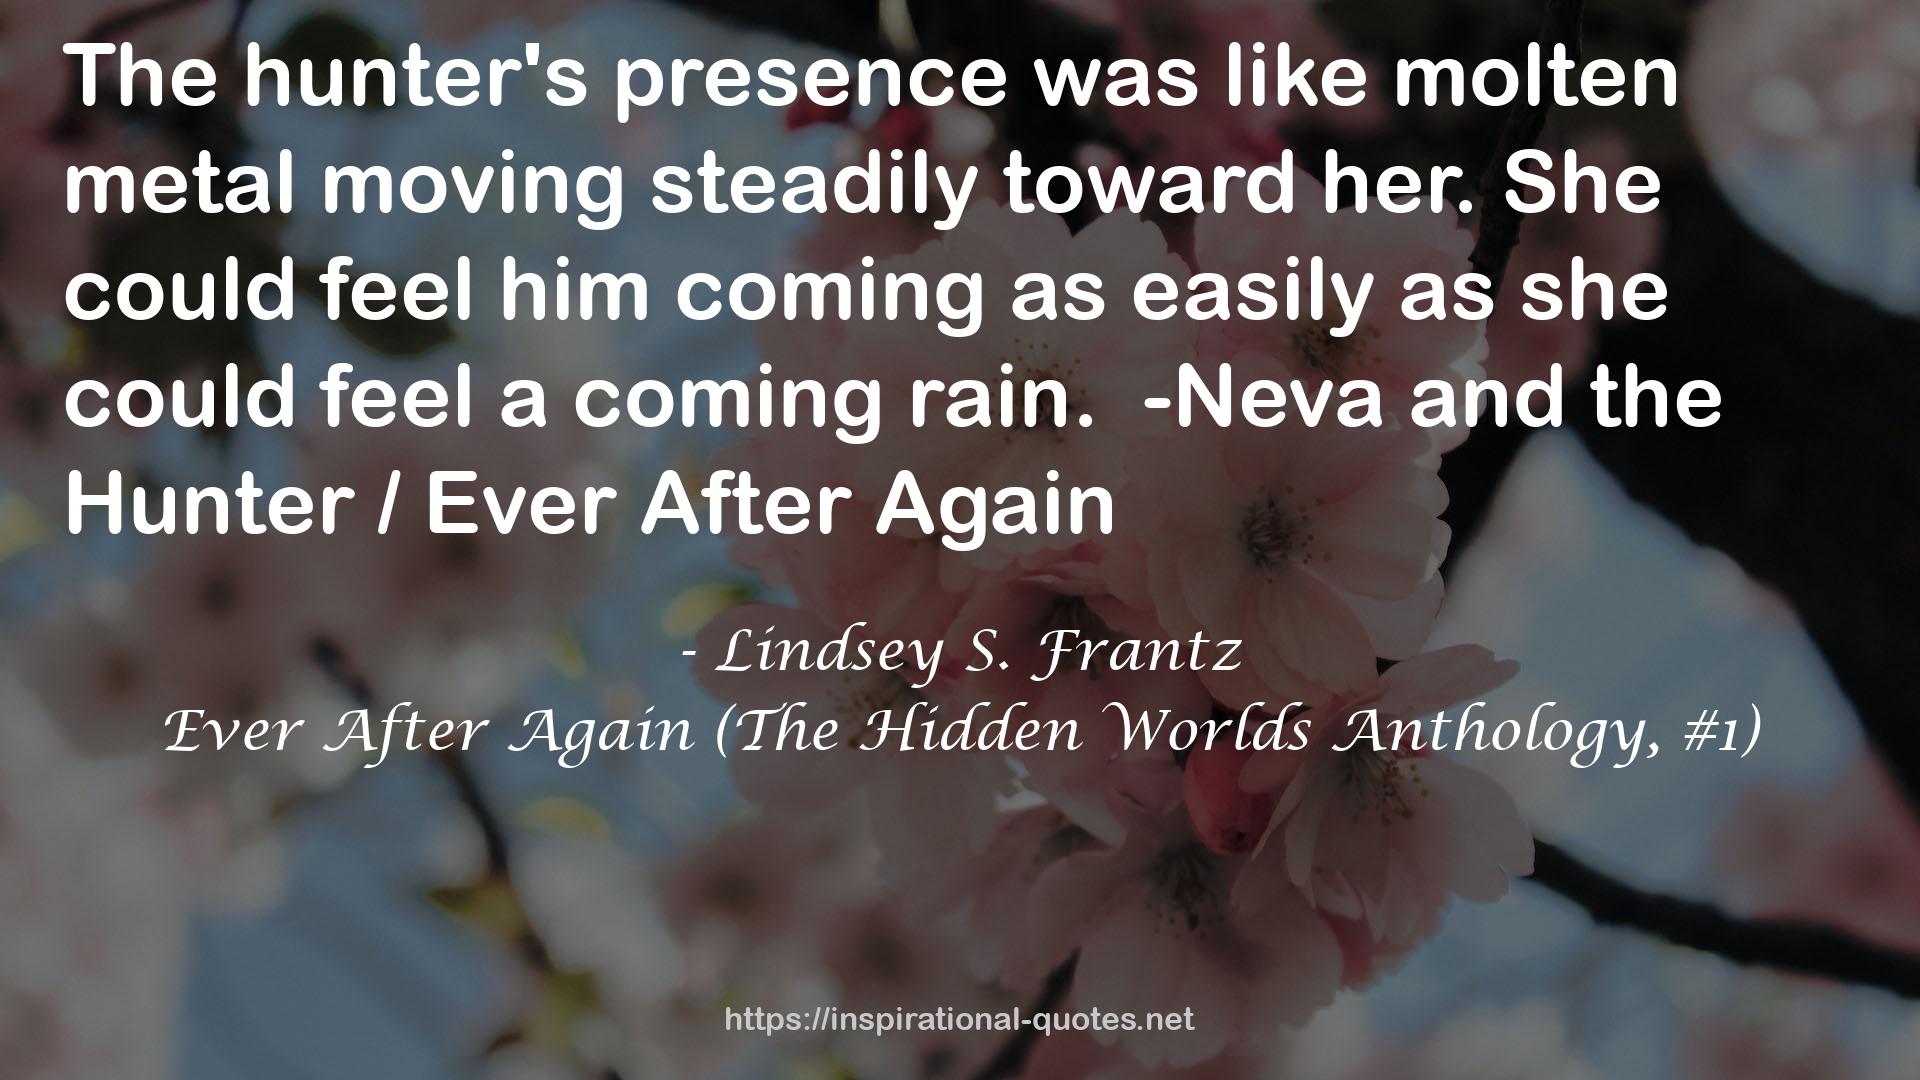 Ever After Again (The Hidden Worlds Anthology, #1) QUOTES